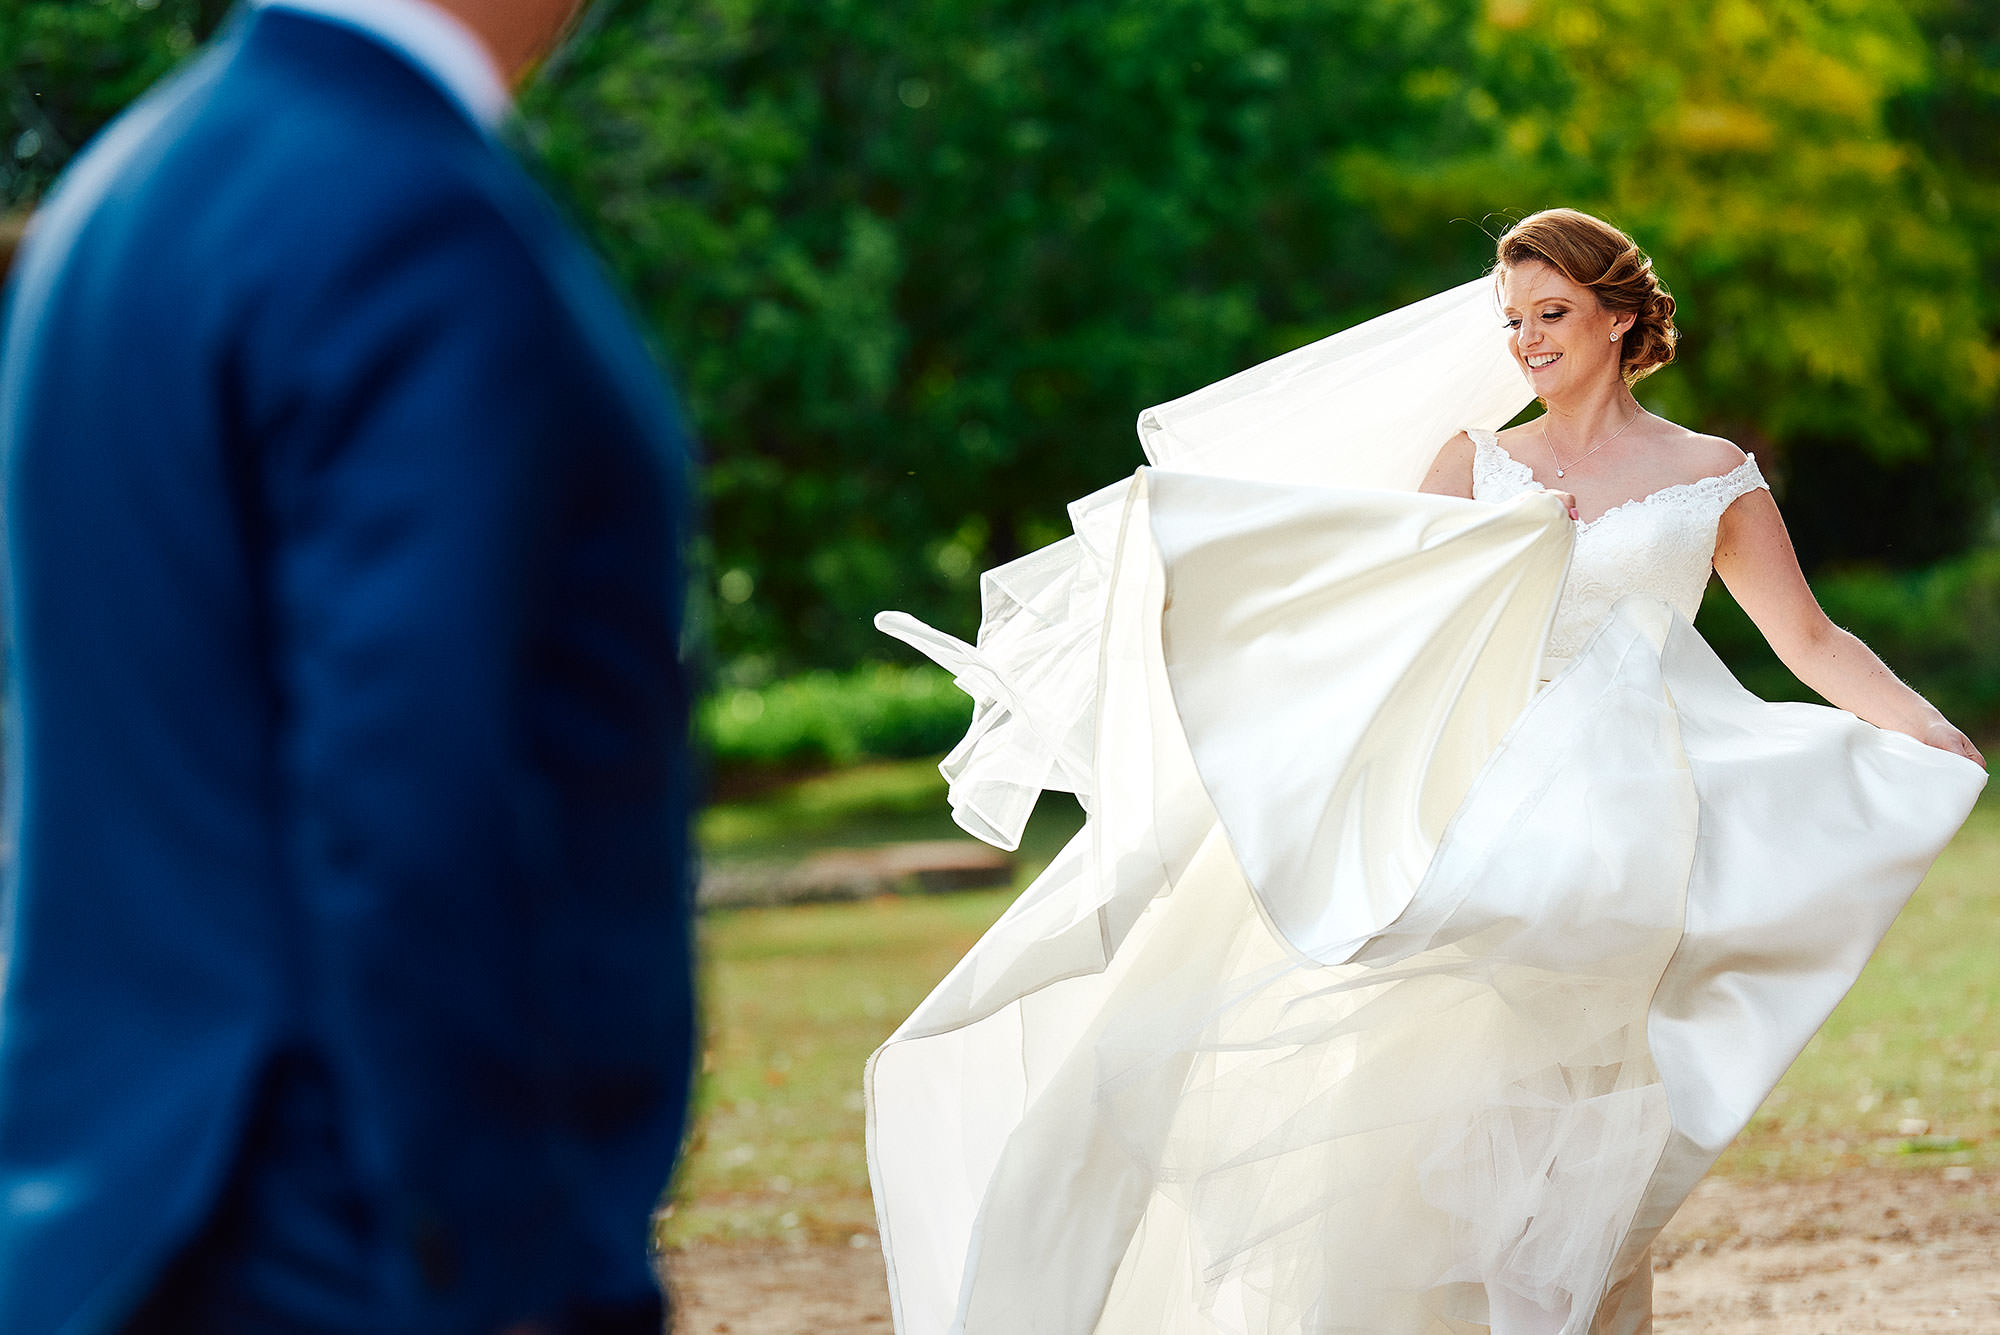 brides dress blowing in the breeze